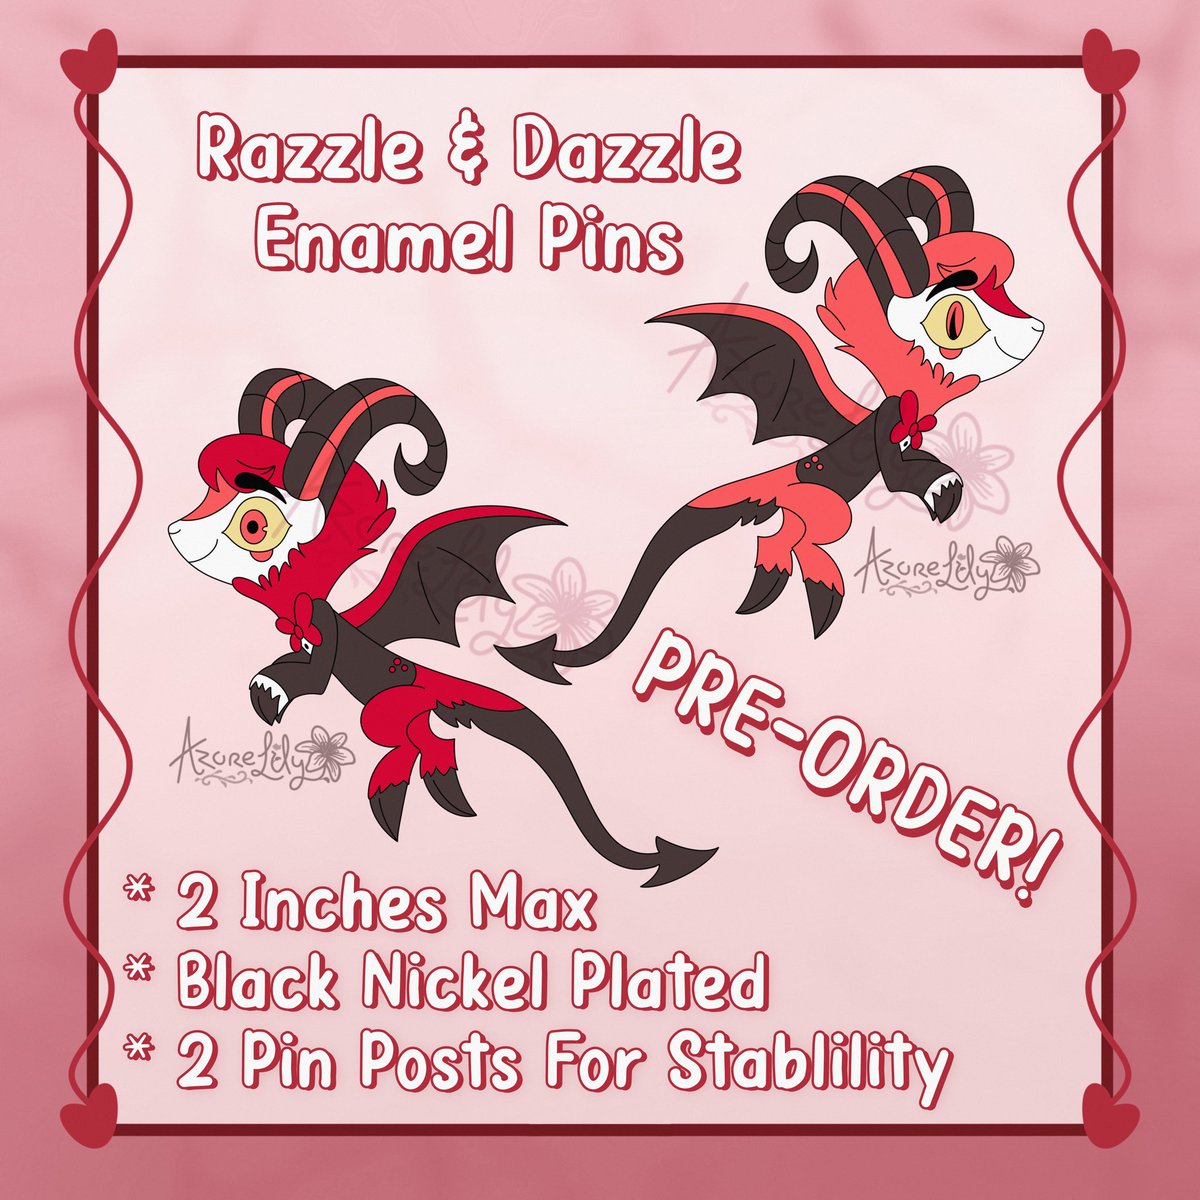 Pre-Orders for these pins will be up until May 31st. The sooner each design gets at least 25 orders the sooner they will be put into production. 😊 In the event that they aren’t fully funded all orders will be refunded. #HazbinHotel #HazbinHotelAlastor #RazzleDazzle